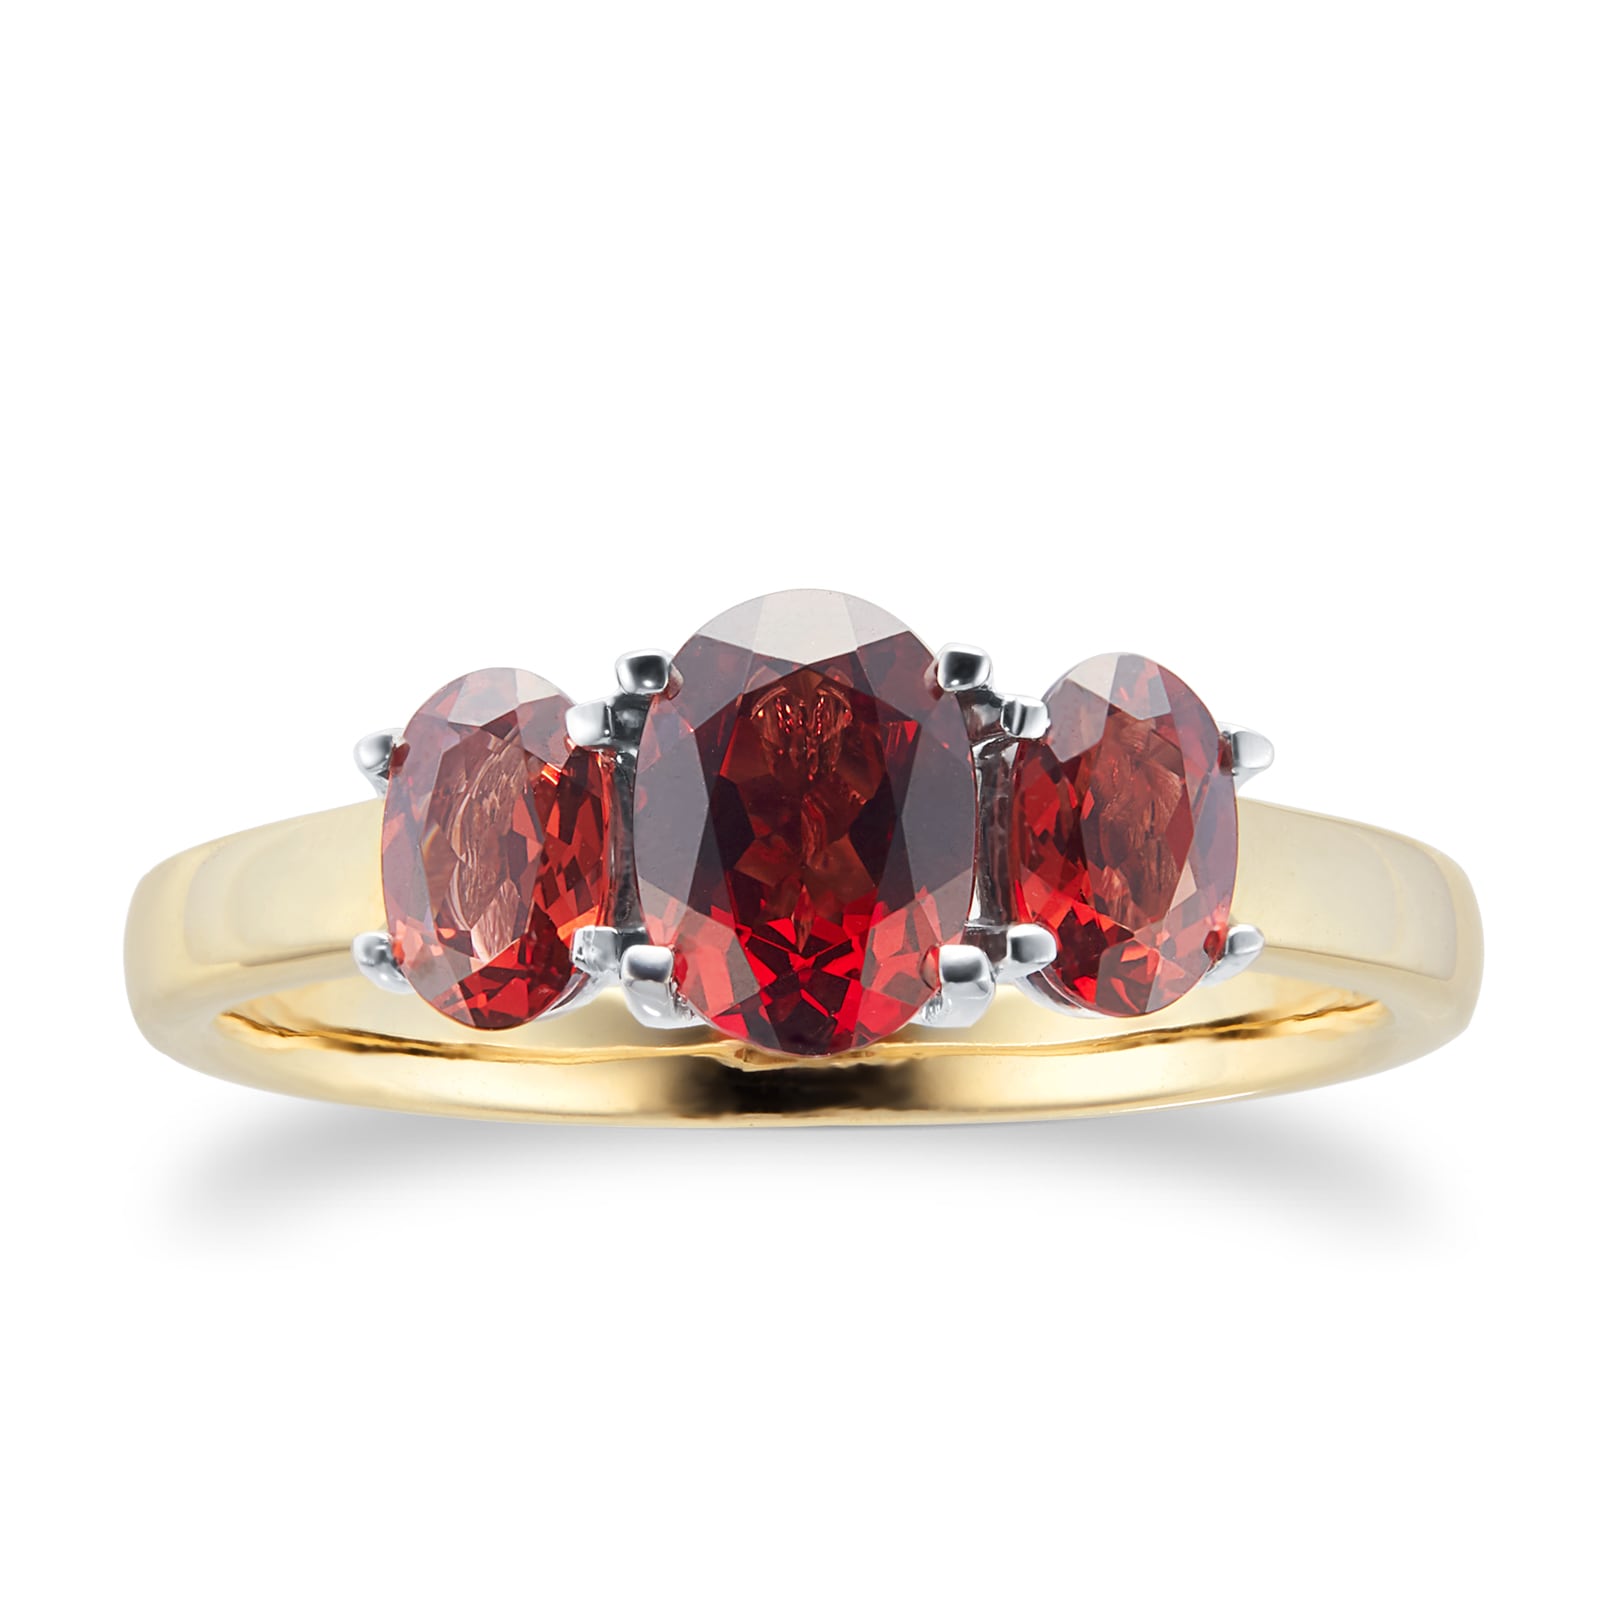 9ct Yellow and White Gold 3 Stone Garnet Ring - Ring Size F.5